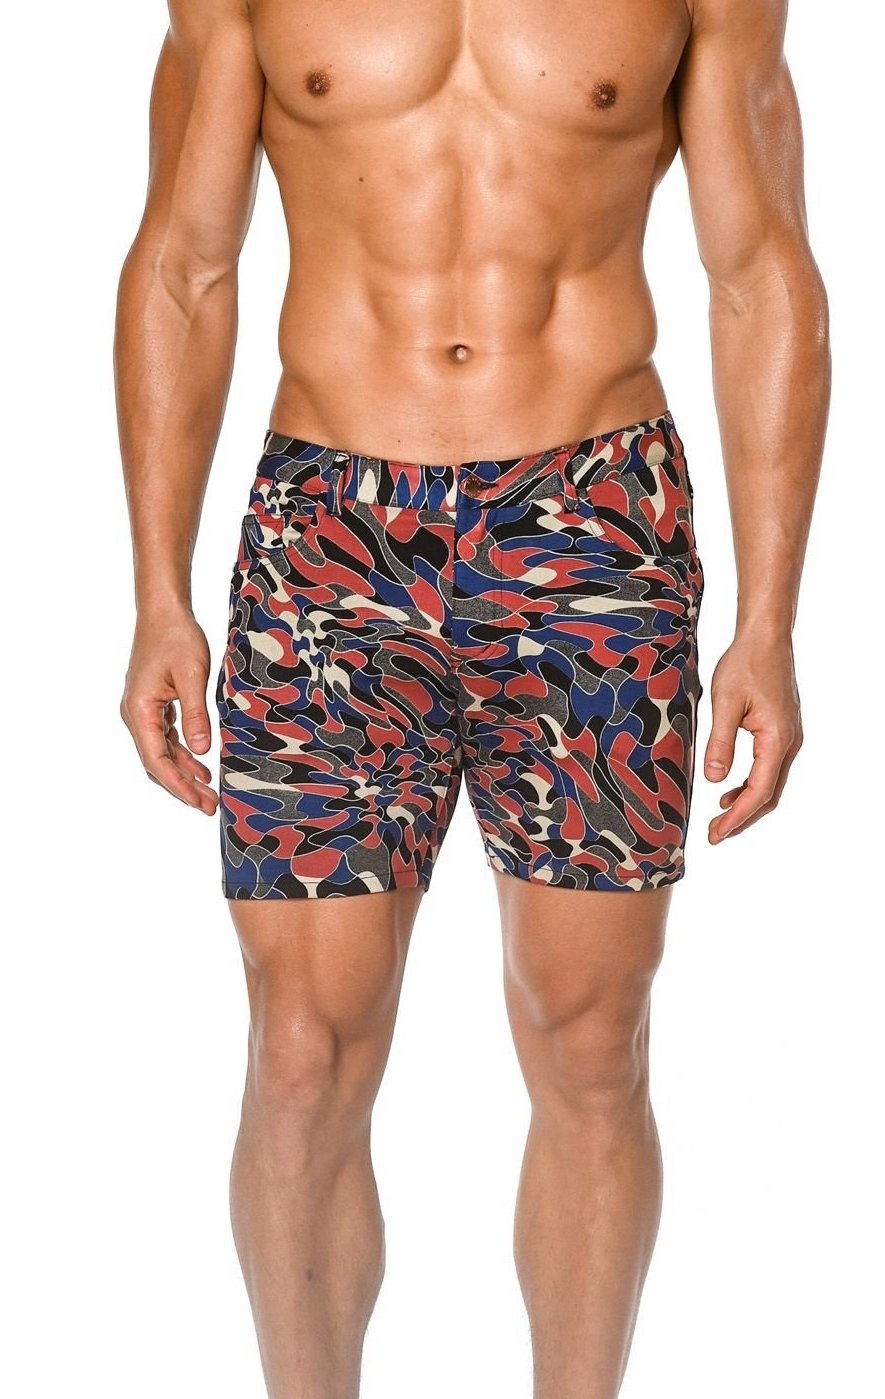 ST33LE Limited Edition 5" Knit Shorts - Brick/Royal Curly Cues